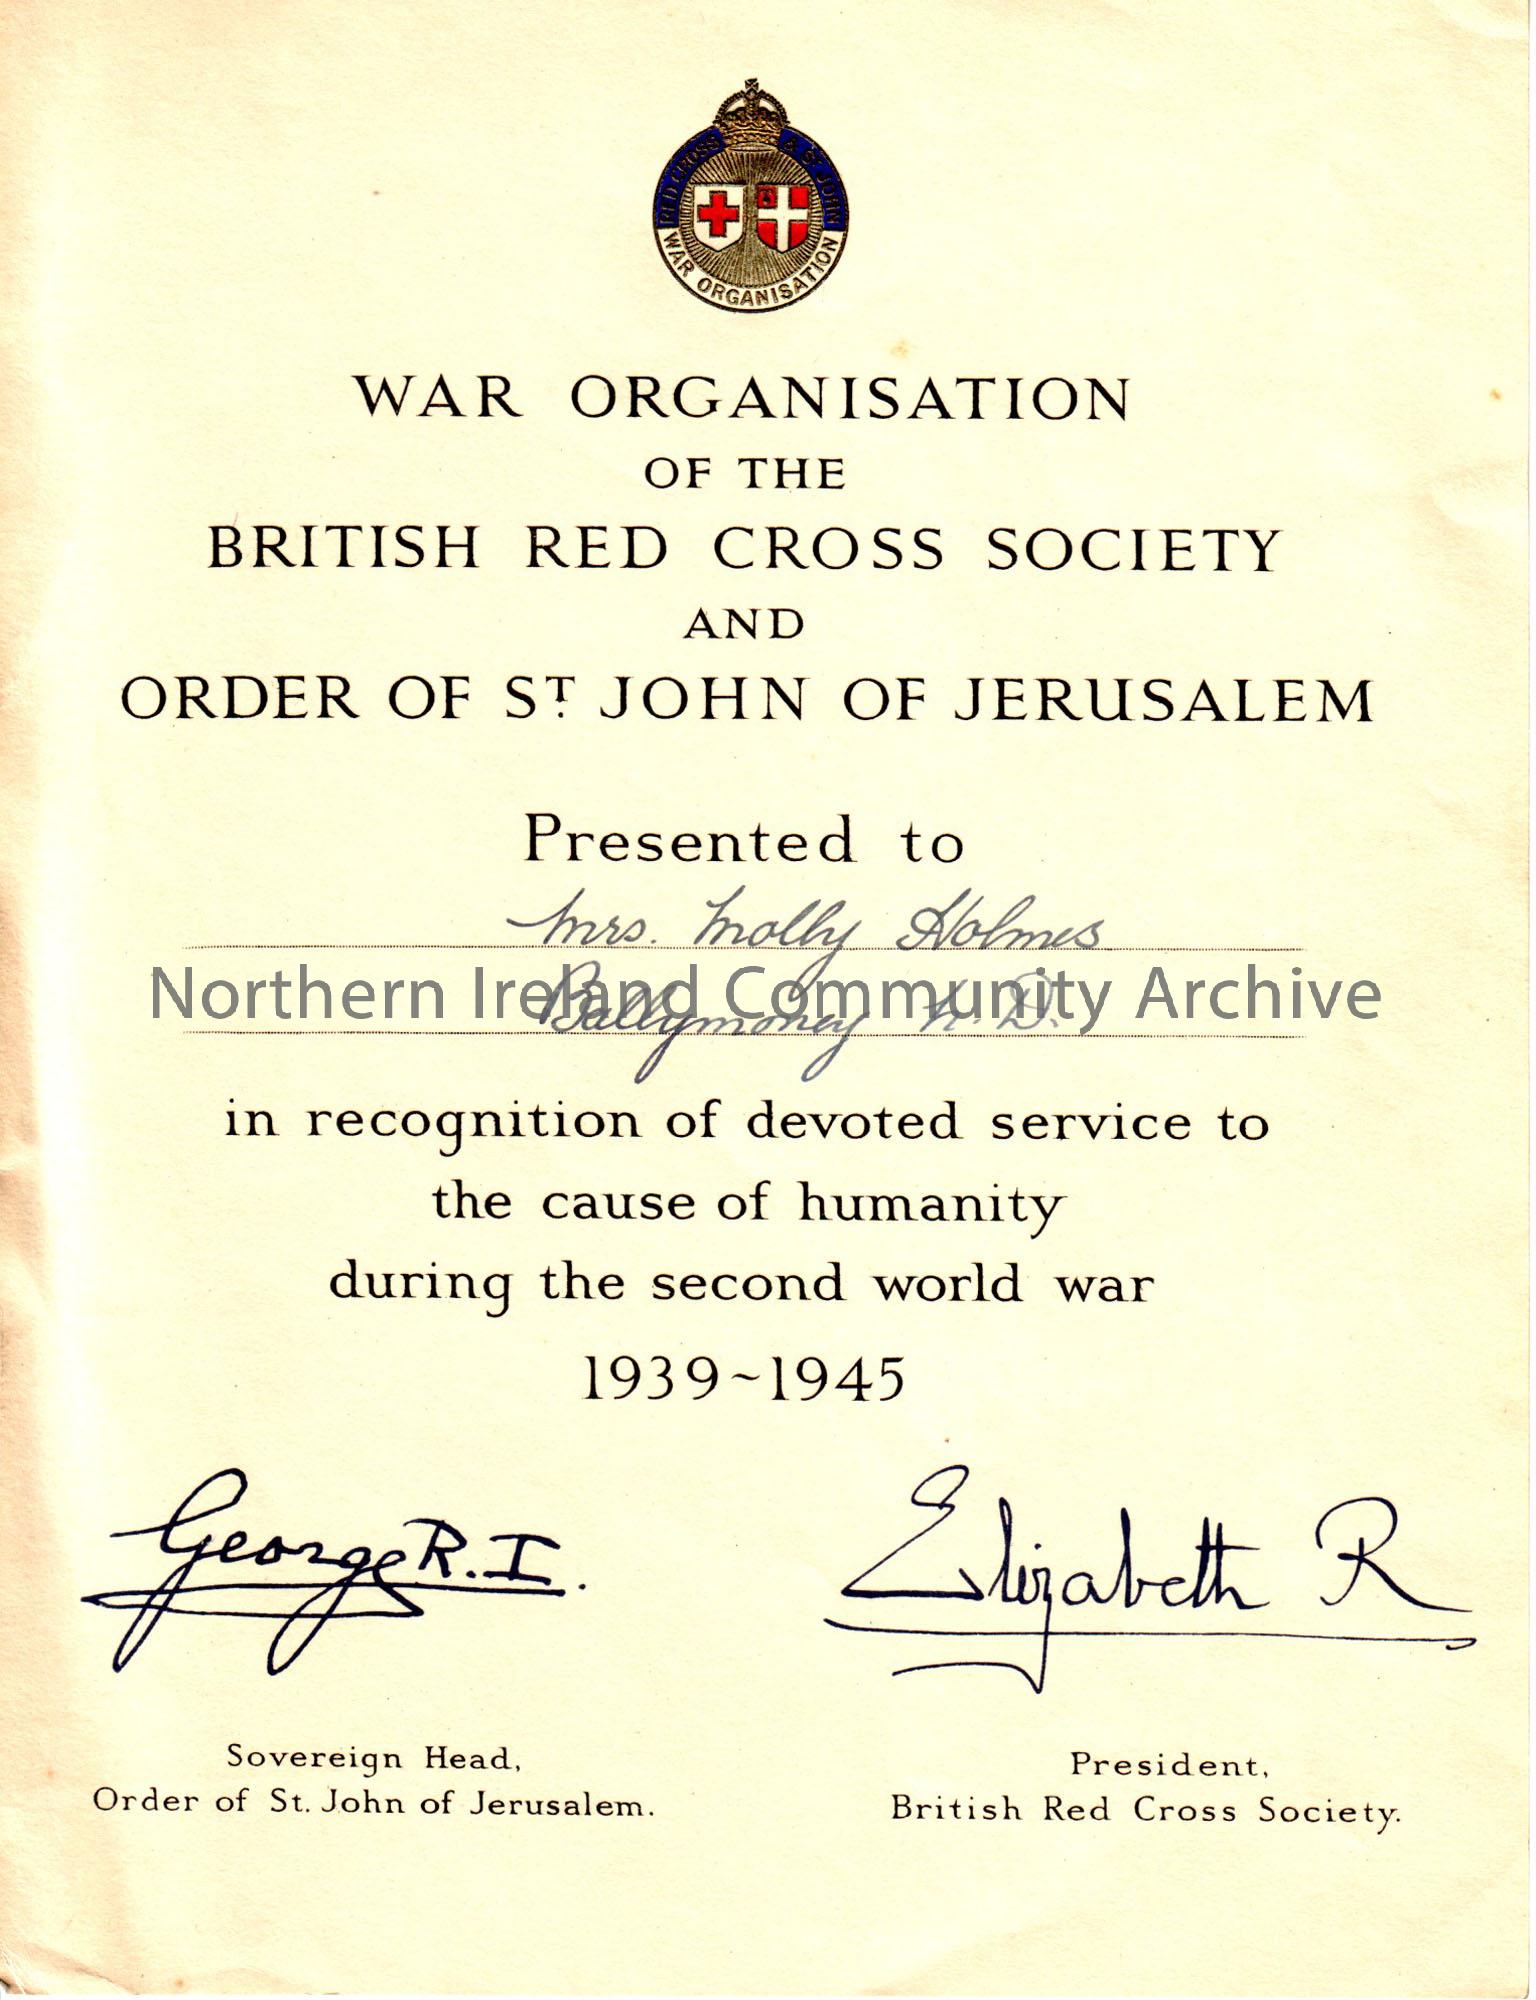 Award presented to Mrs Molly Holmes by the British Red Cross Society and The Order of St John of Jerusalem, in recognition of service during the secon…